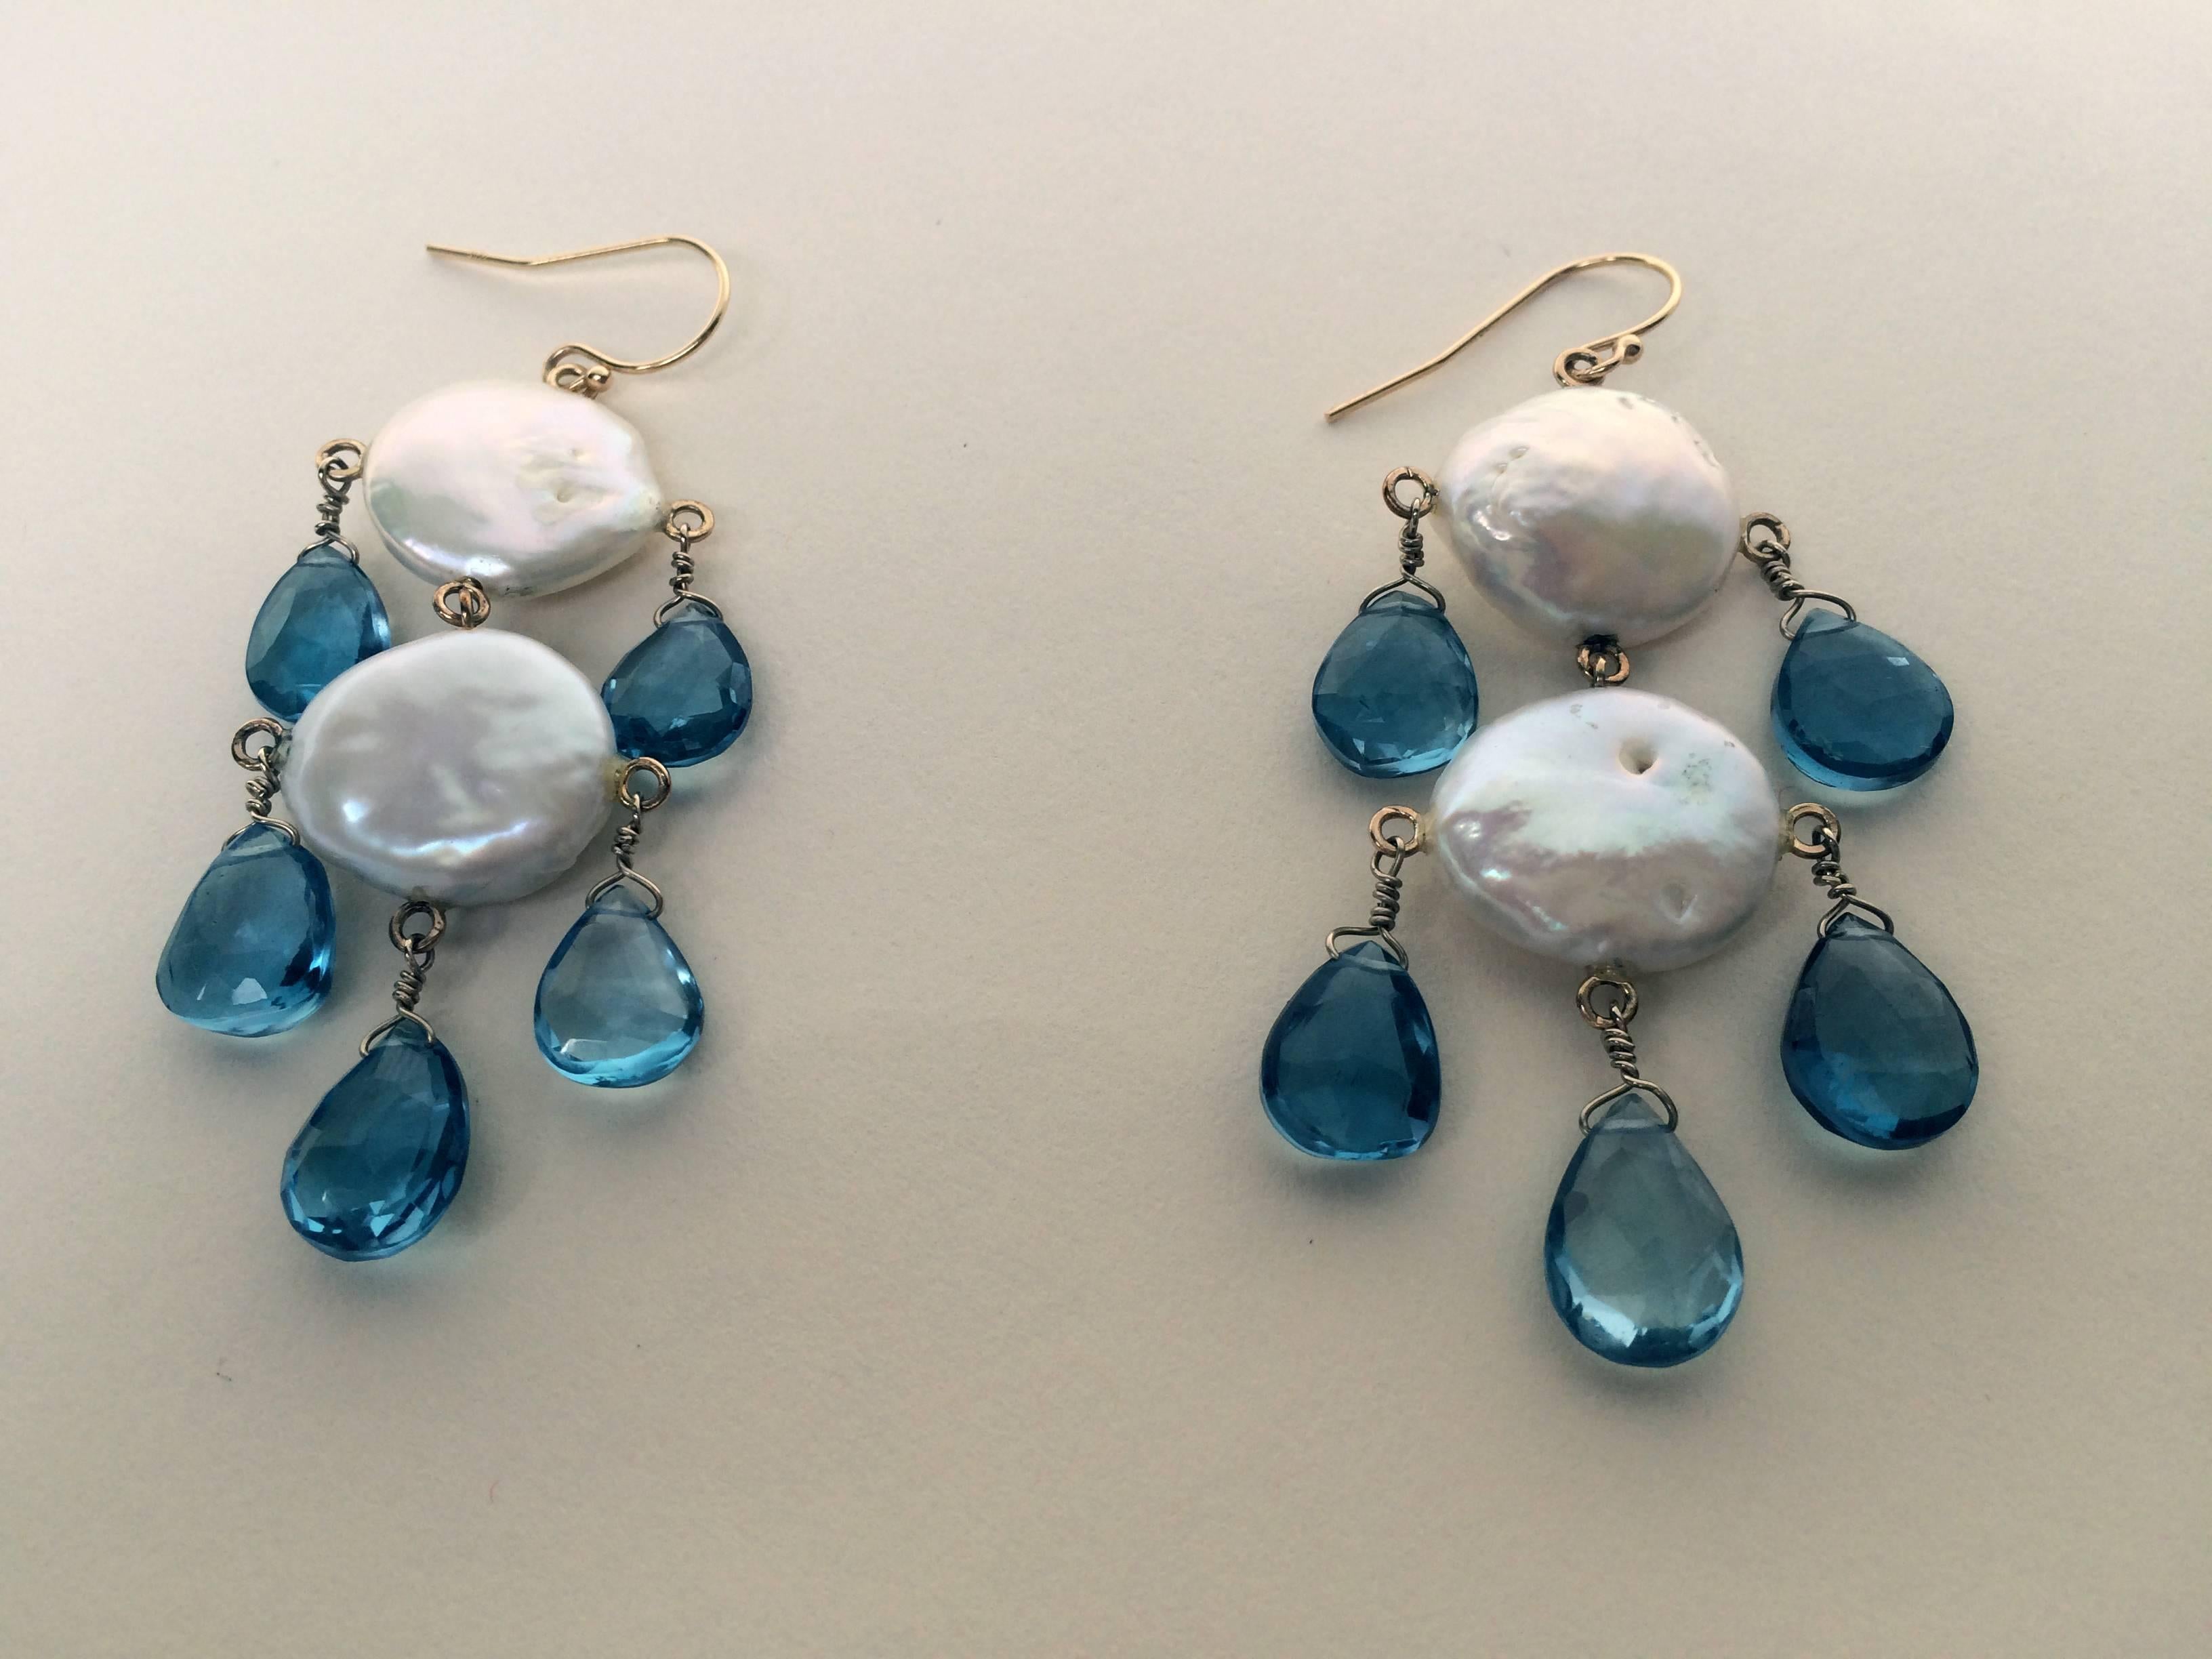 Women's Marina J Double Pearl Earrings with London Blue Topaz Drops and 14 k  gold 